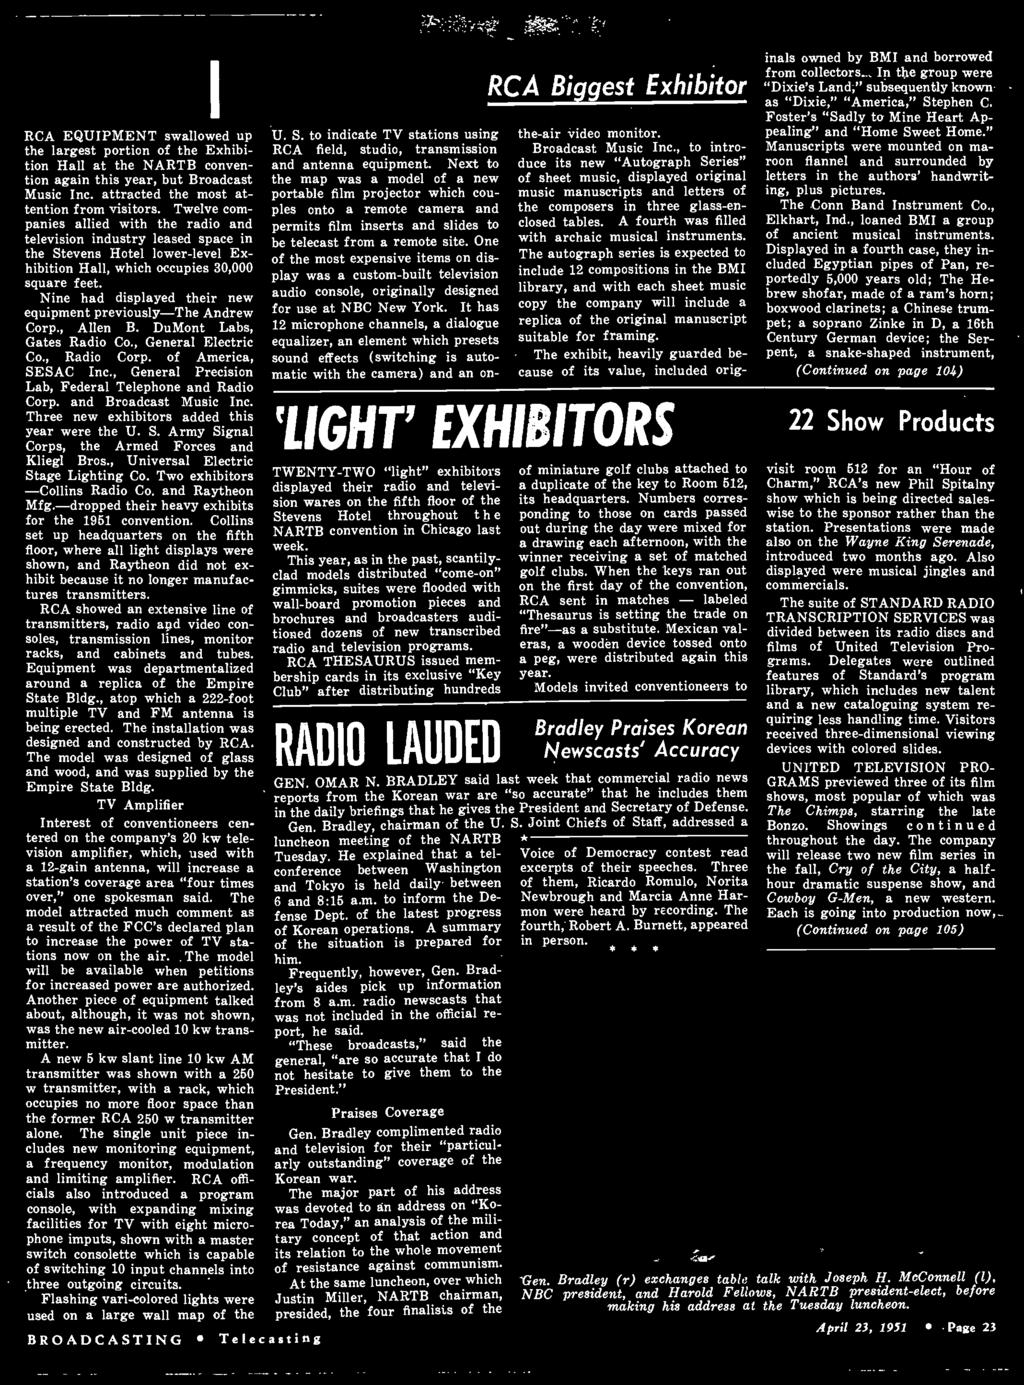 , Universal Electric Stage Lighting Co. Two exhibitors -Collins Radio Co. and Raytheon Mfg. -dropped their heavy exhibits for the 1951 convention.